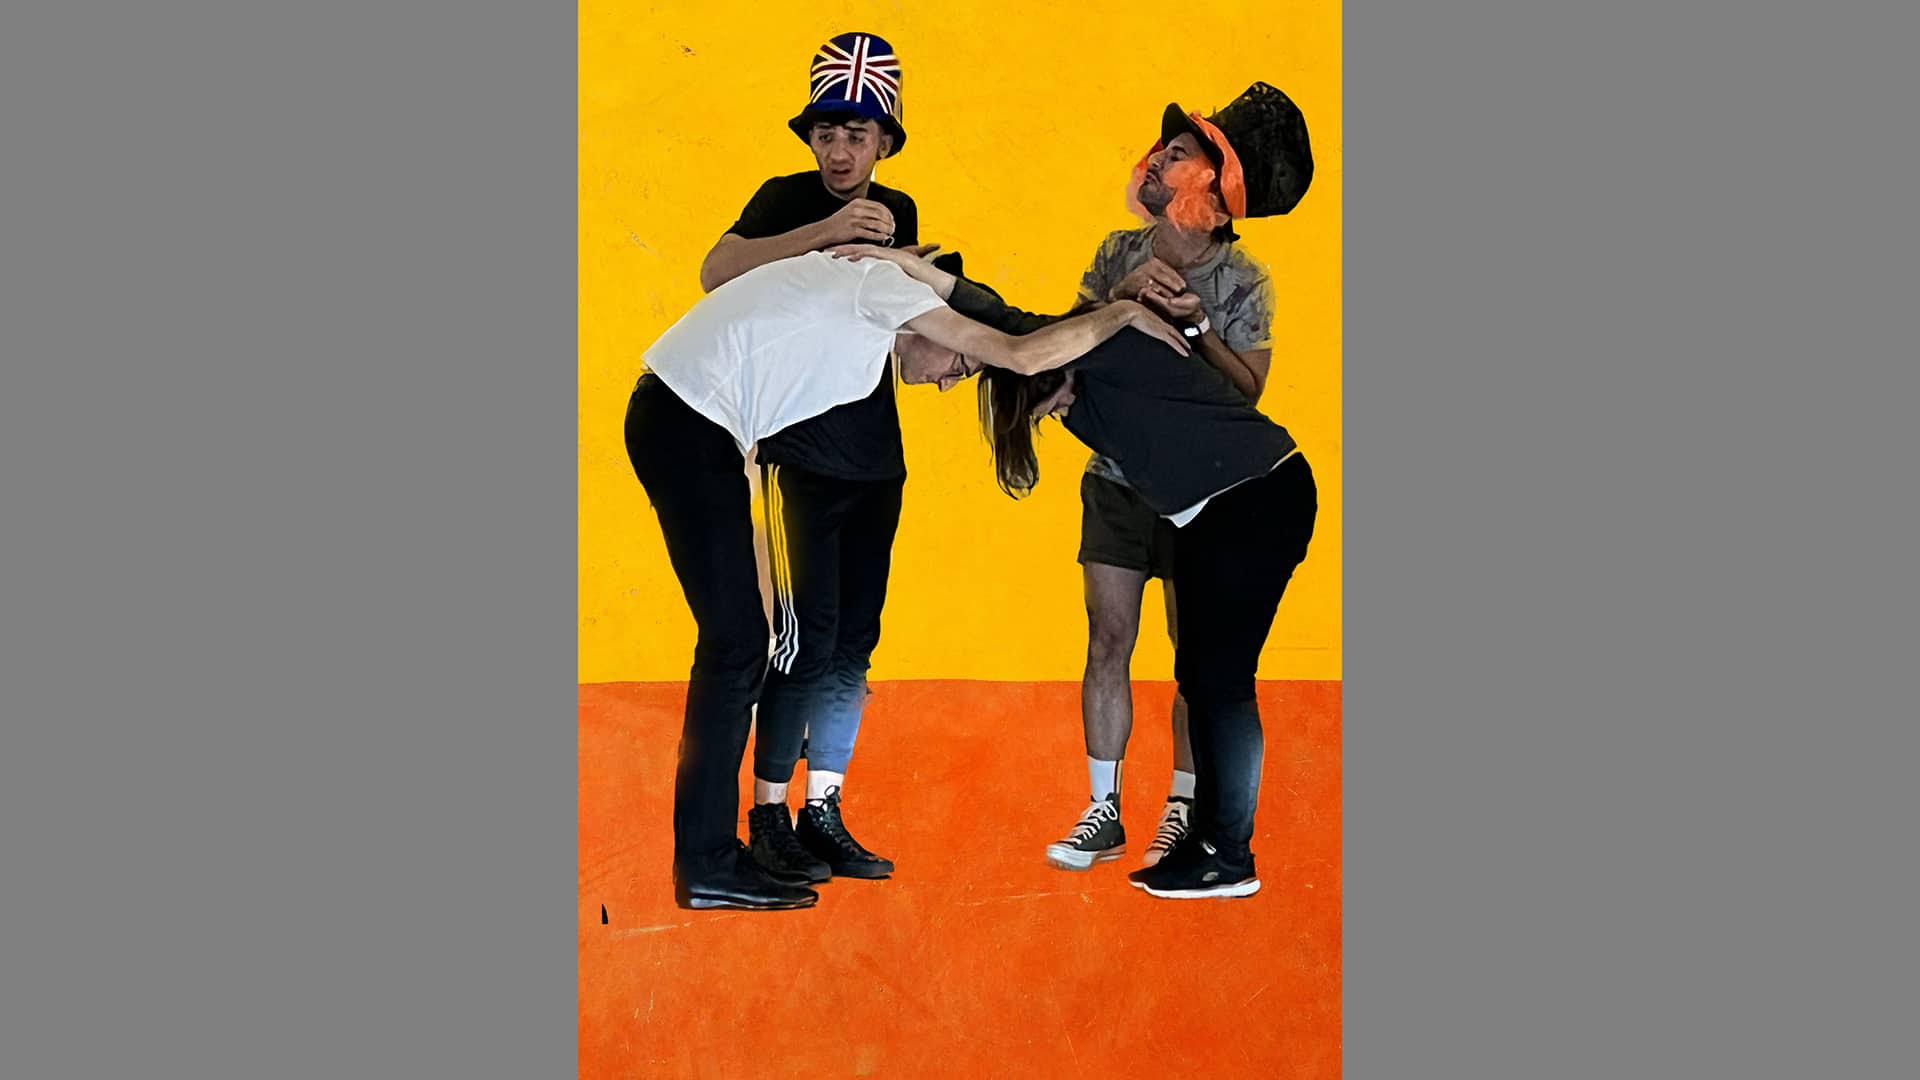 Four figures are positioned in front of a yellow and orange background. Two bend towards each other, laying their hands on each other's backs. Behind them the other two look to one side. They wear massive top hats